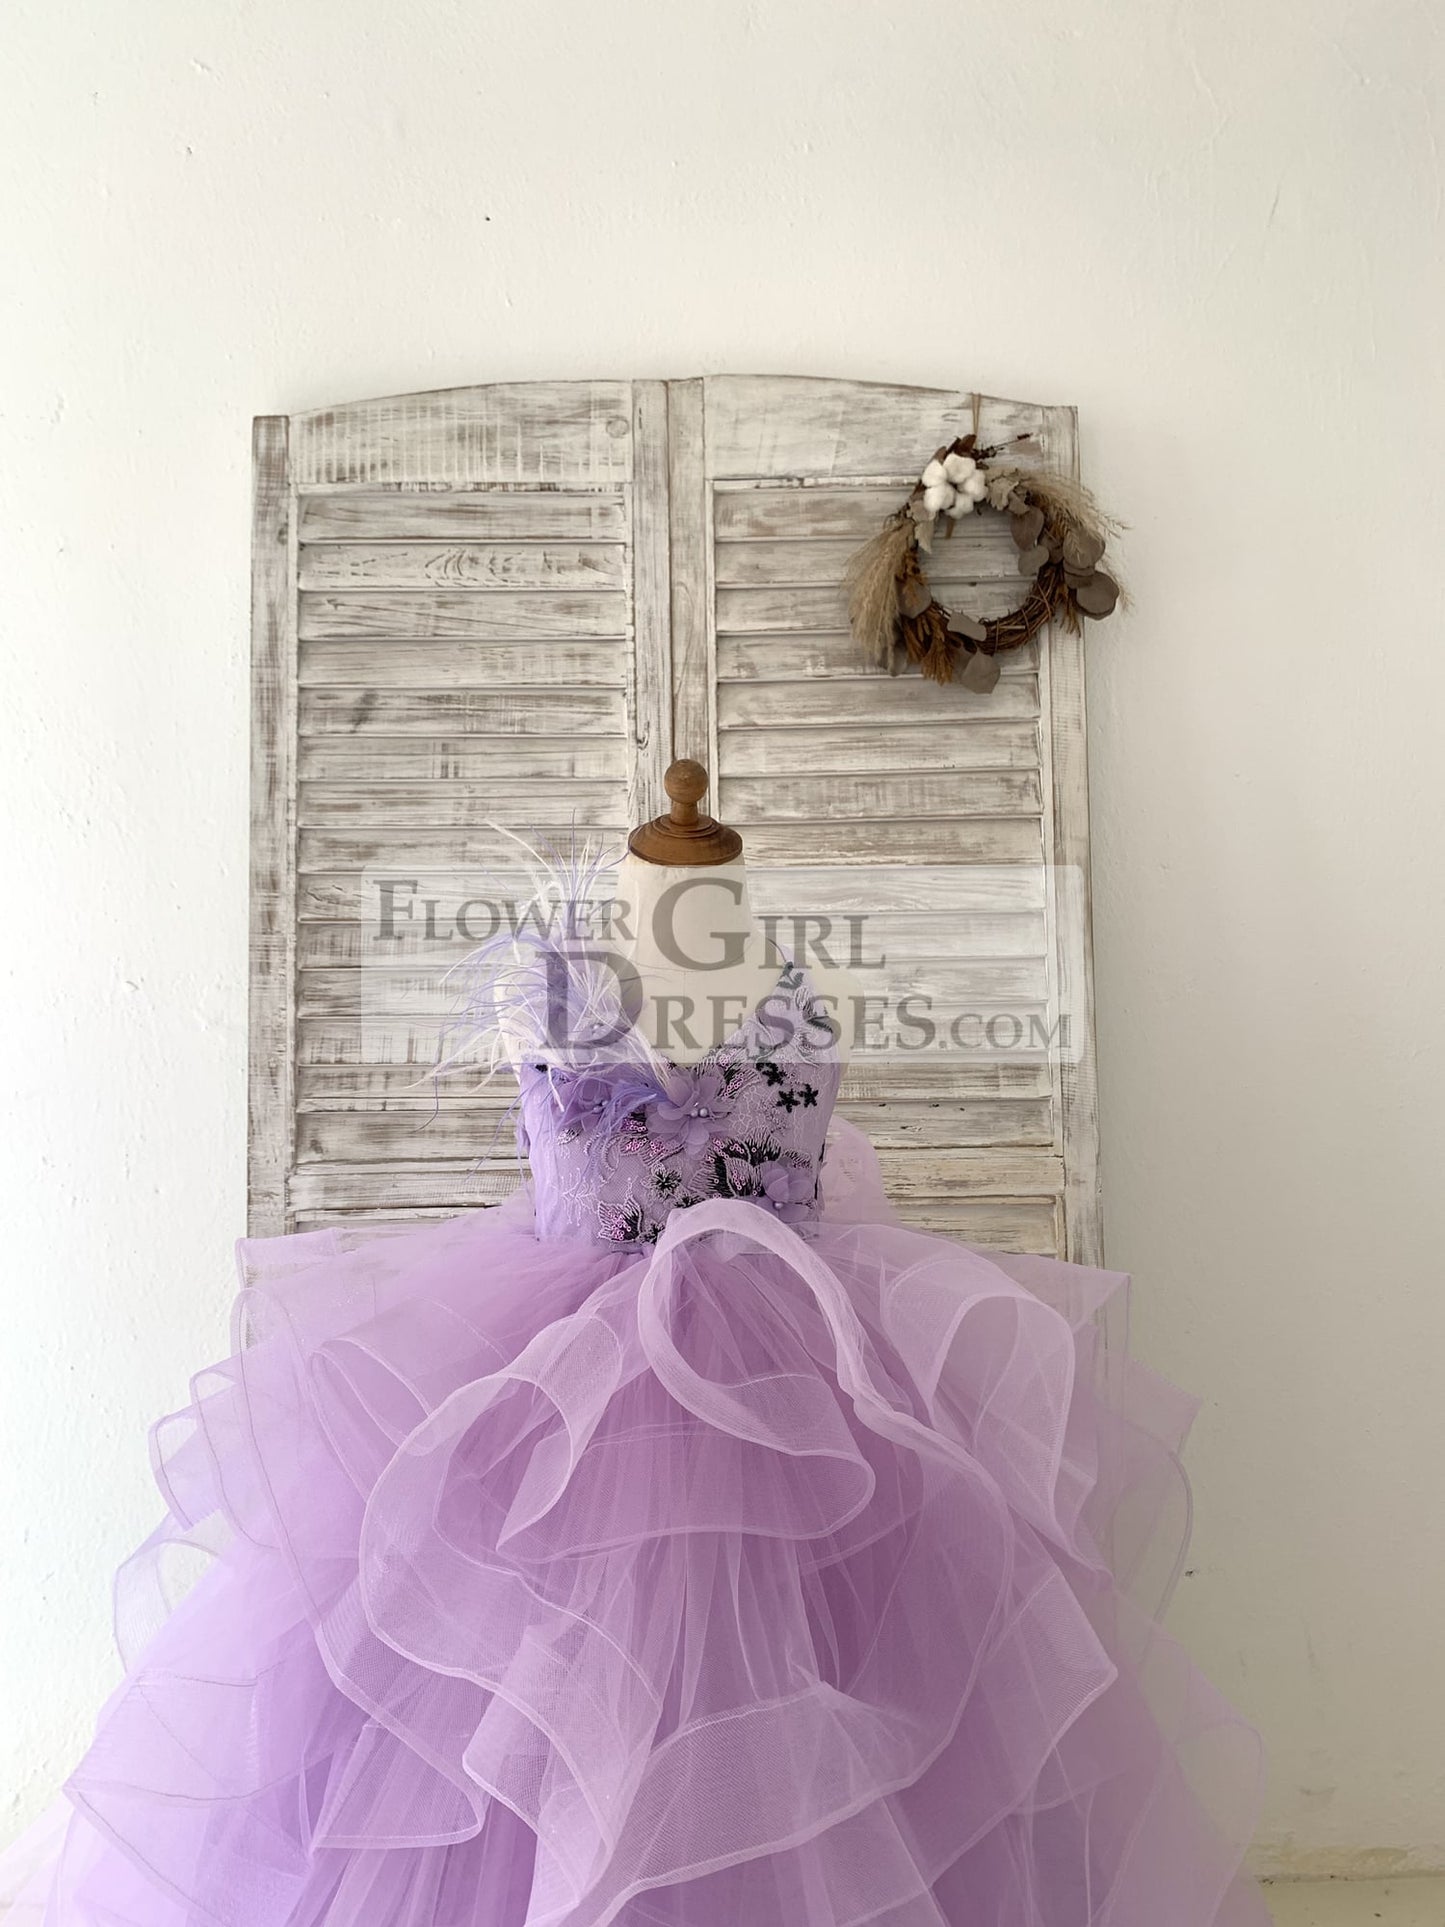 Lavender Lace Tulle Wedding Flower Girl Dress Kids Party Dress Ball Gown with Feathers/Horsehair